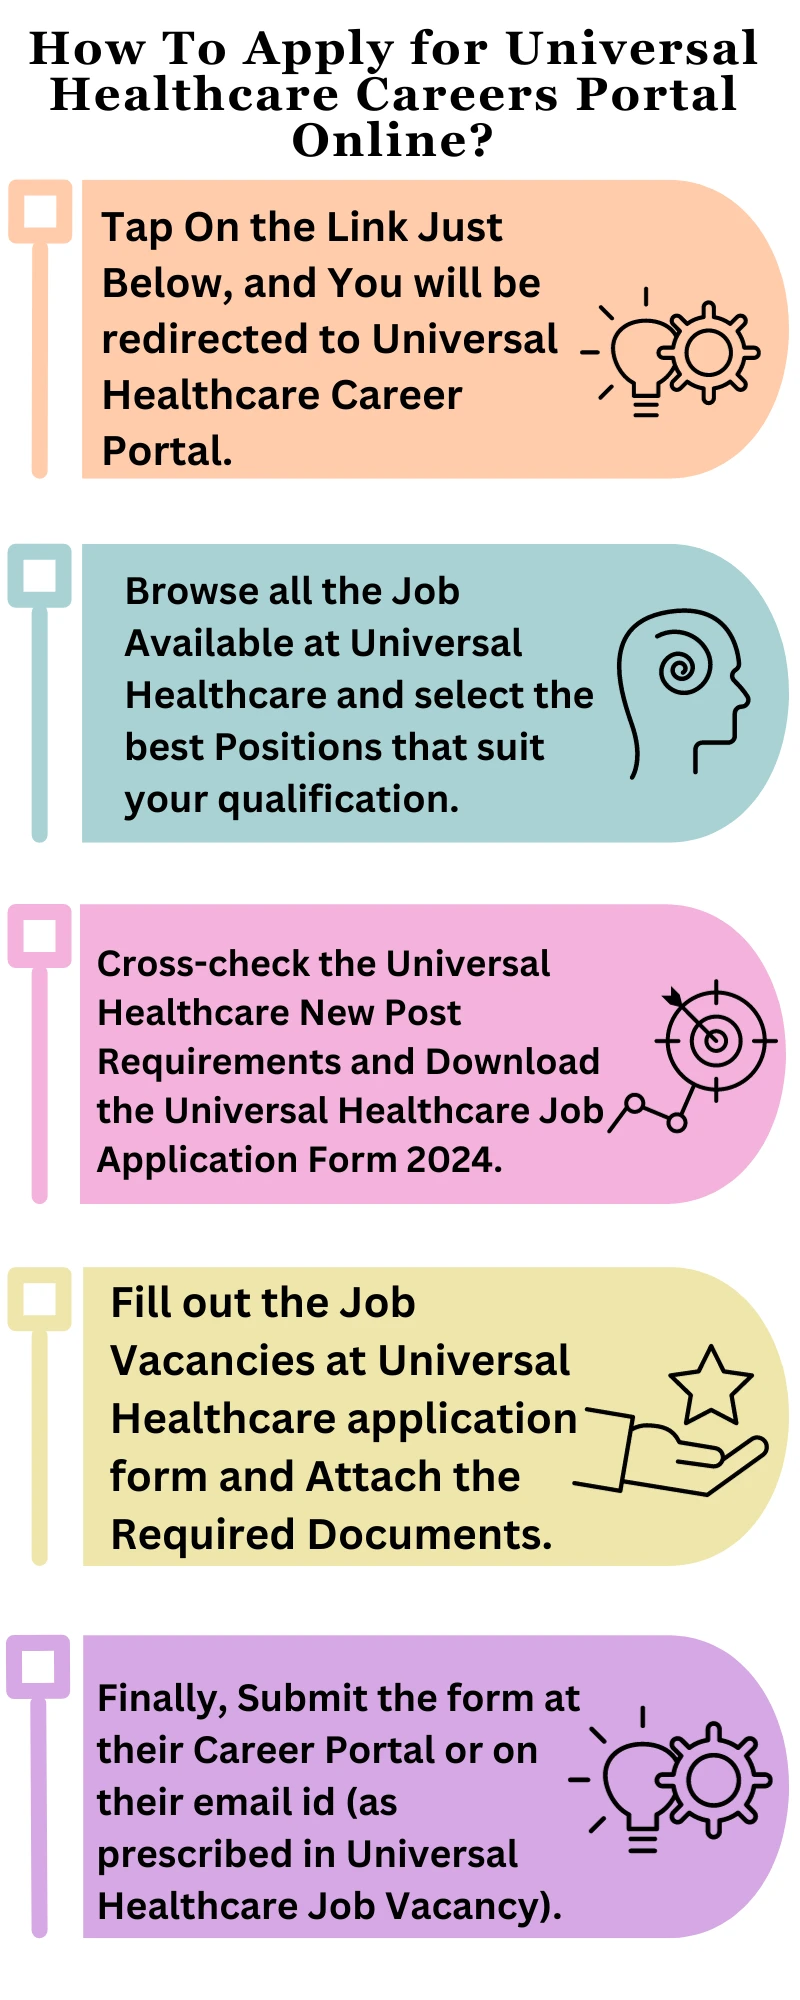 How To Apply for Universal Healthcare Careers Portal Online?